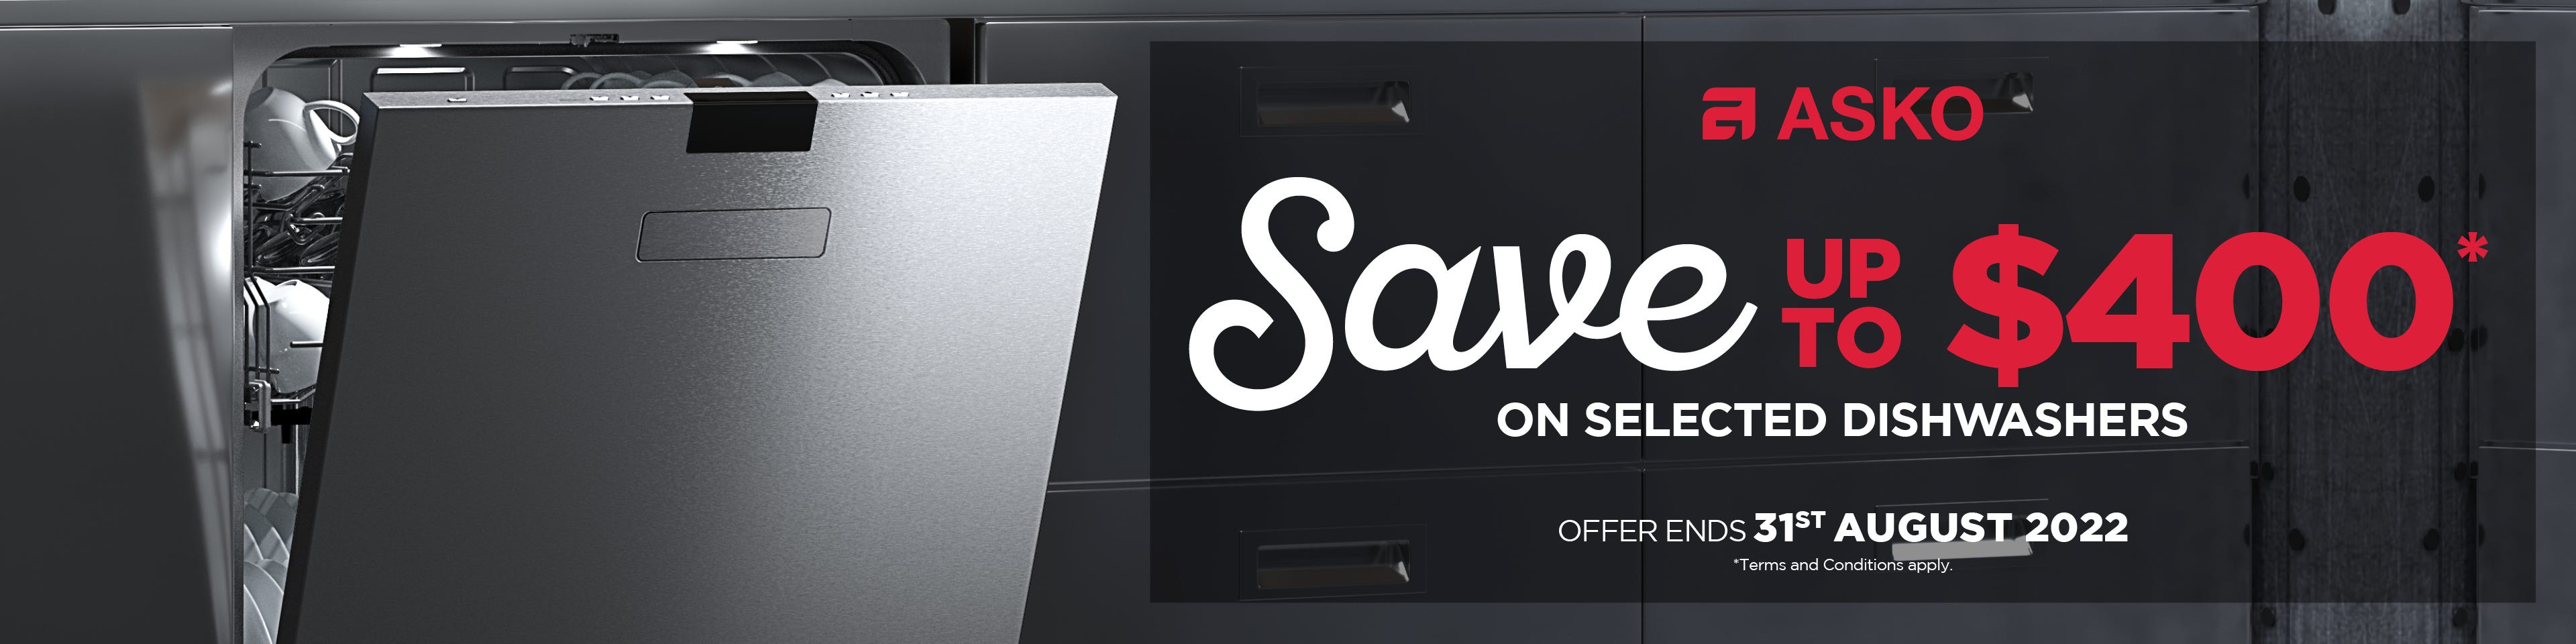 Save up to $400* on selected ASKO dishwashers at e&s. Offer ends 31/08/22. Find out more at an e&s near you today.